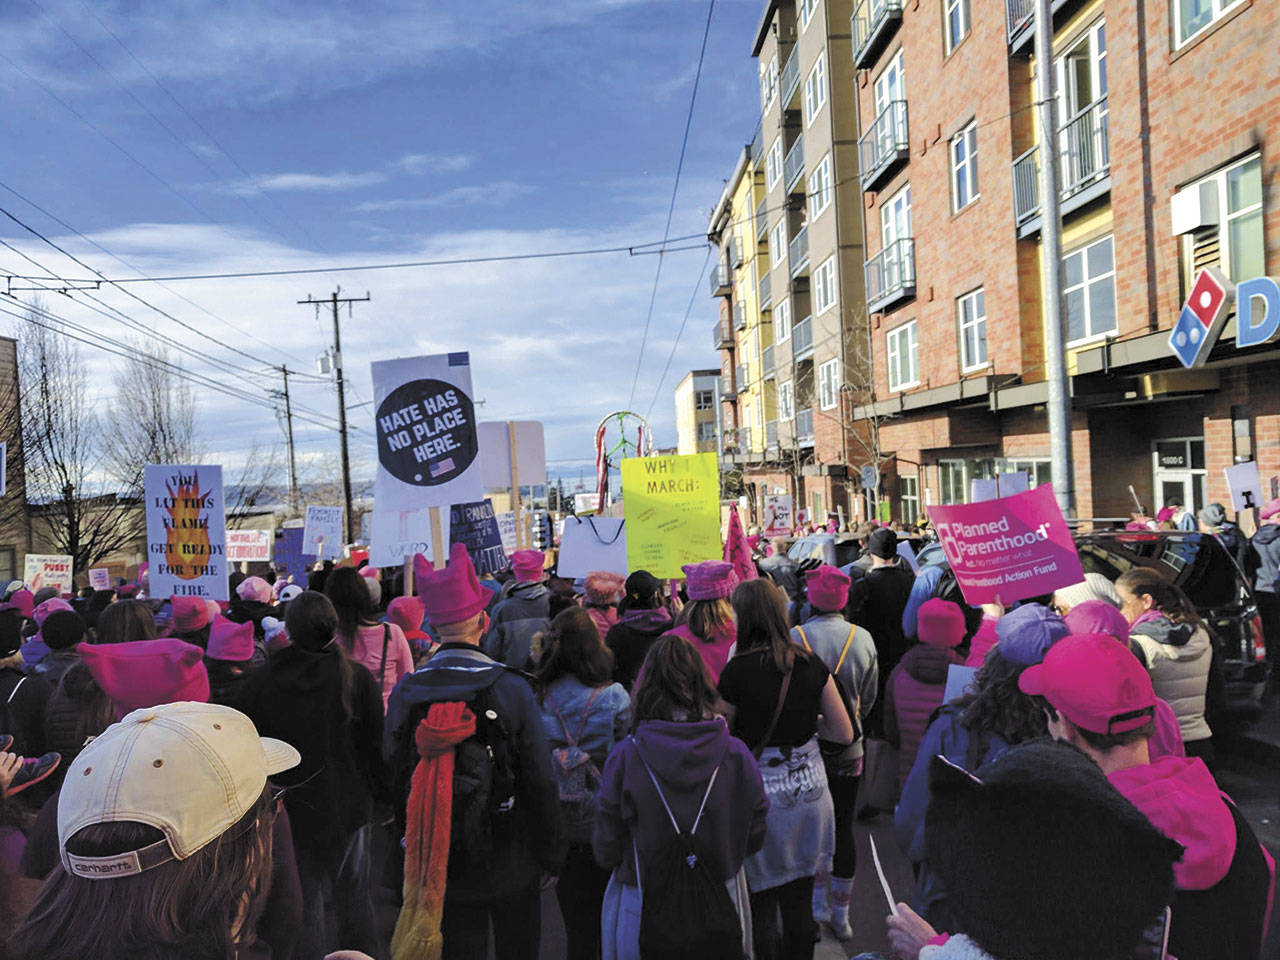 Participants make their way along the route during last year’s march. (Jenna Riggs photo)